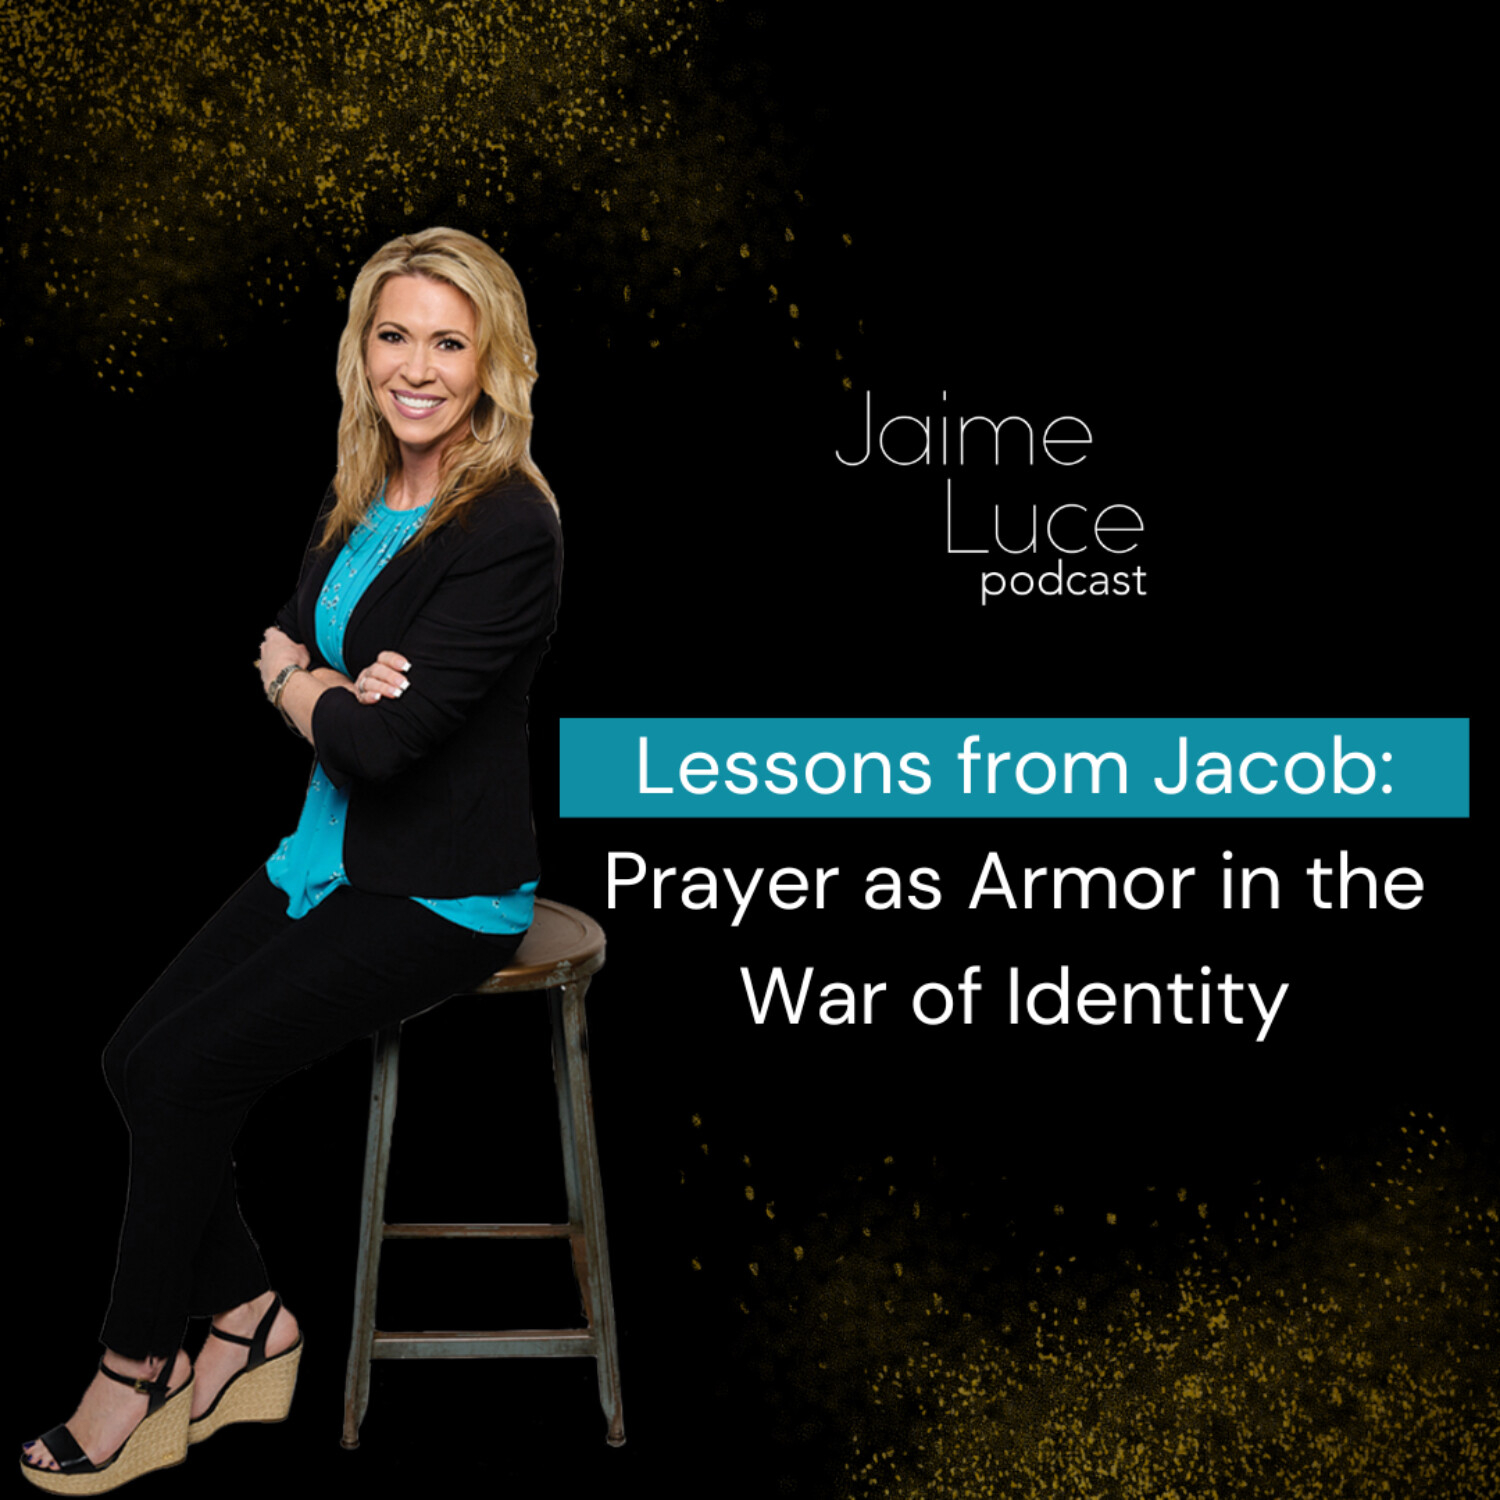 Lessons from Jacob: Prayer as Armor in the War of Identity